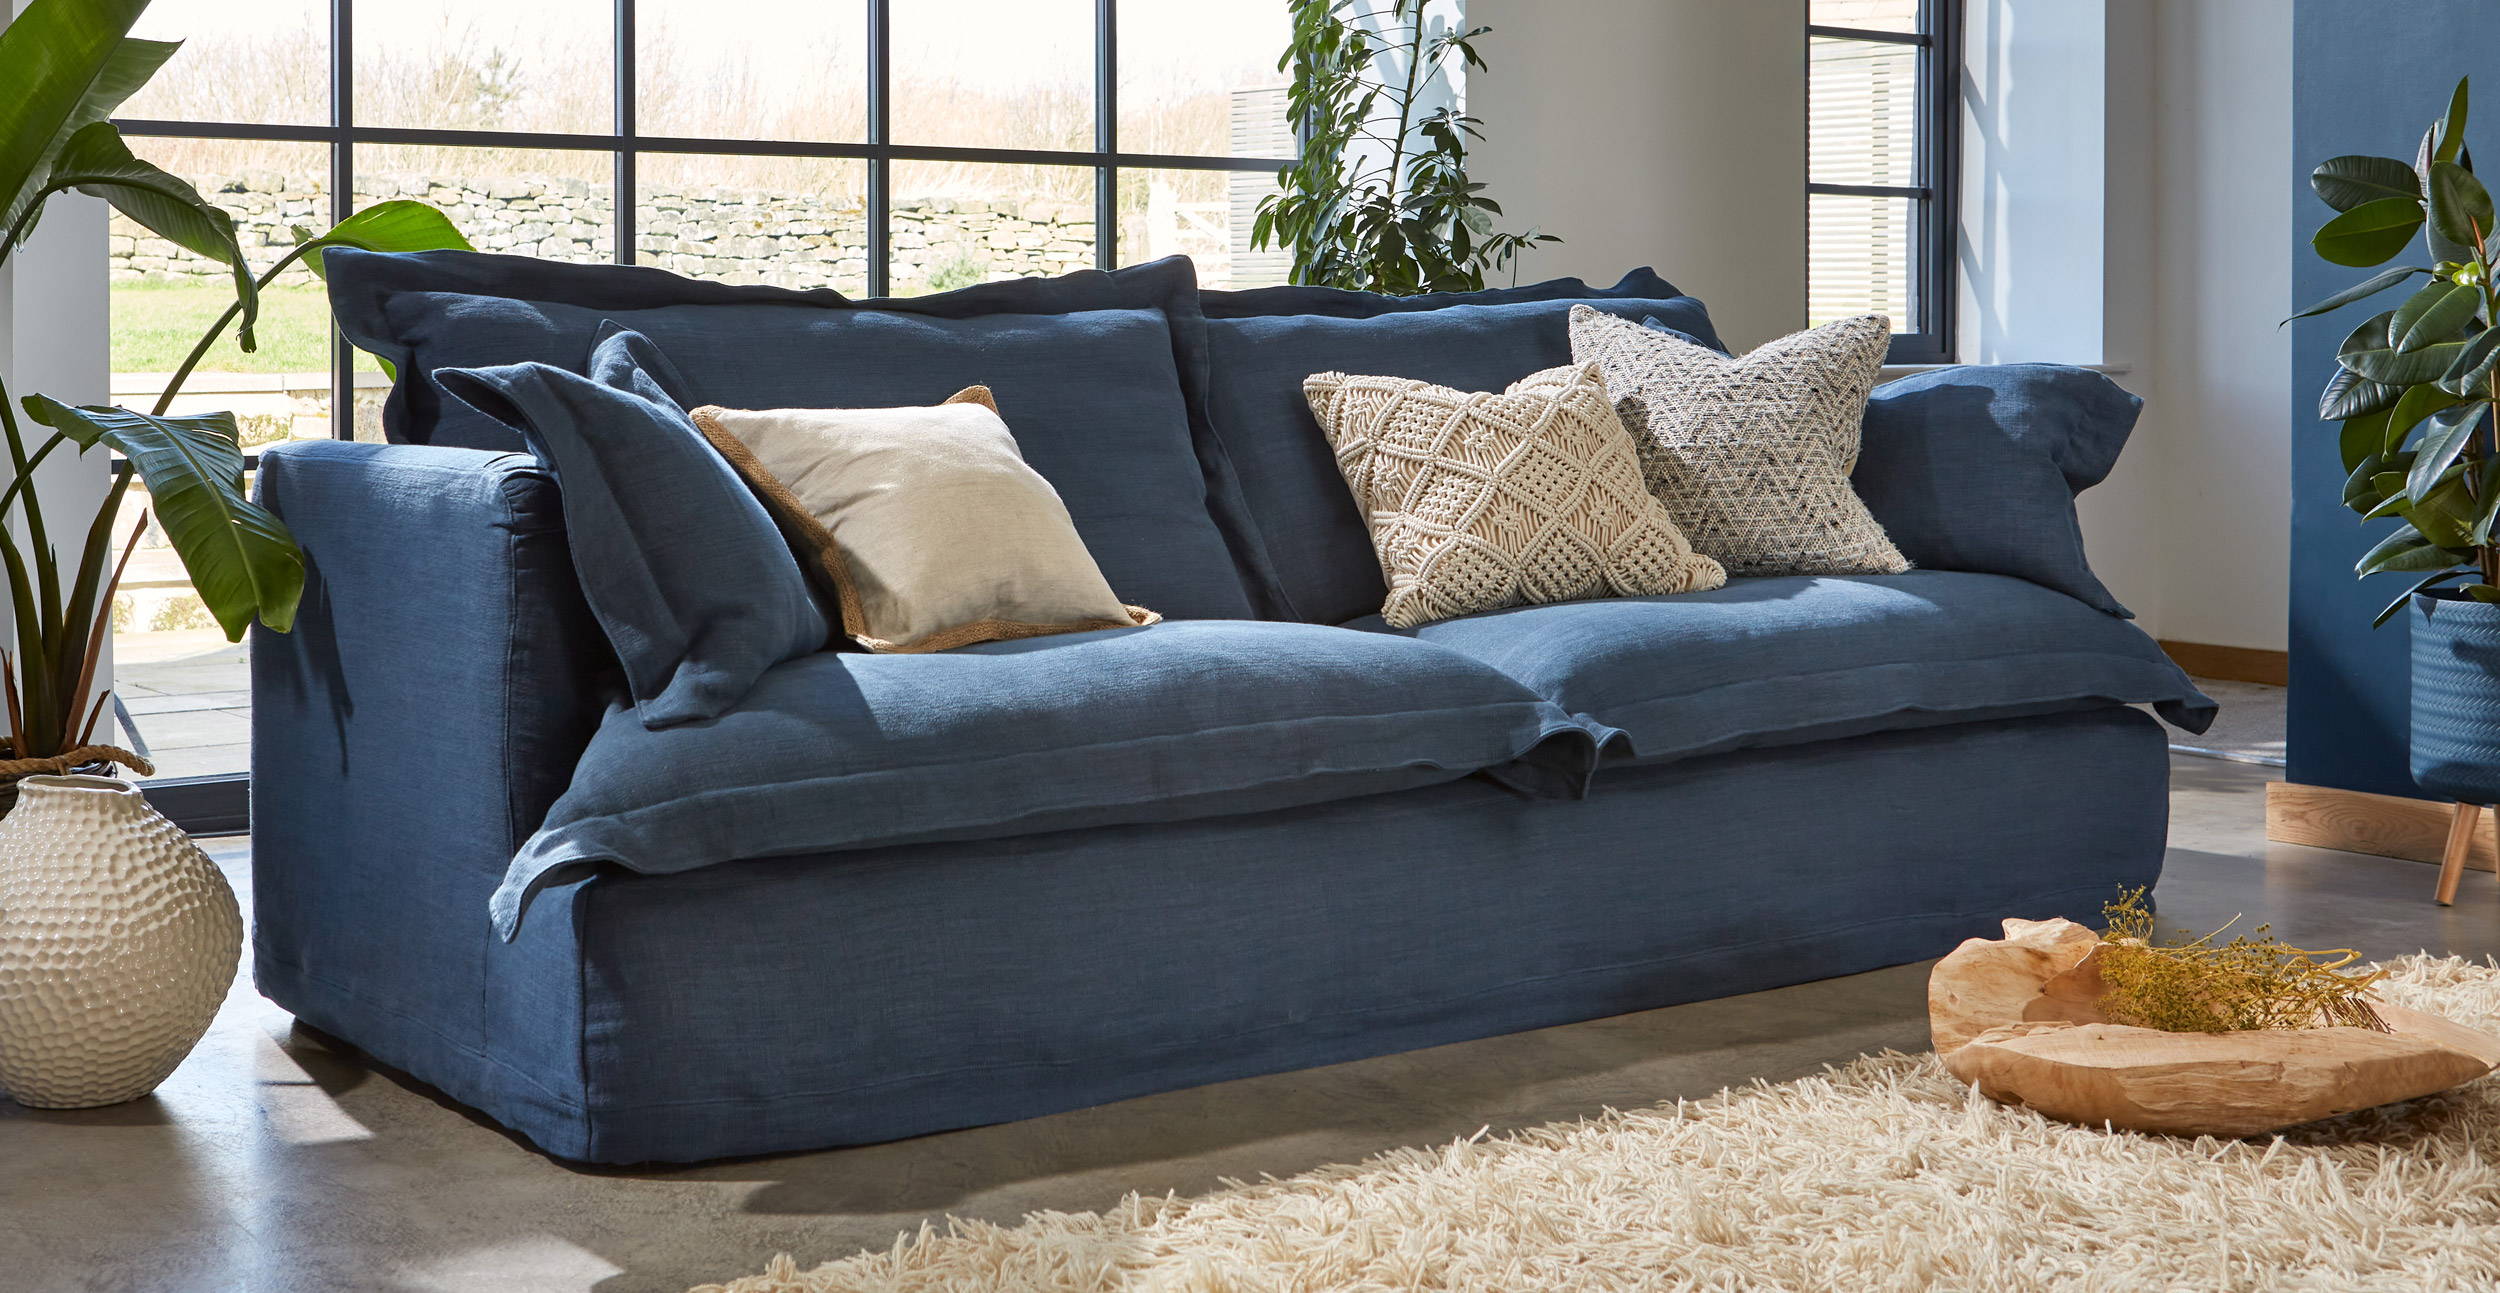 Shop The Frida Sofa Collection Online